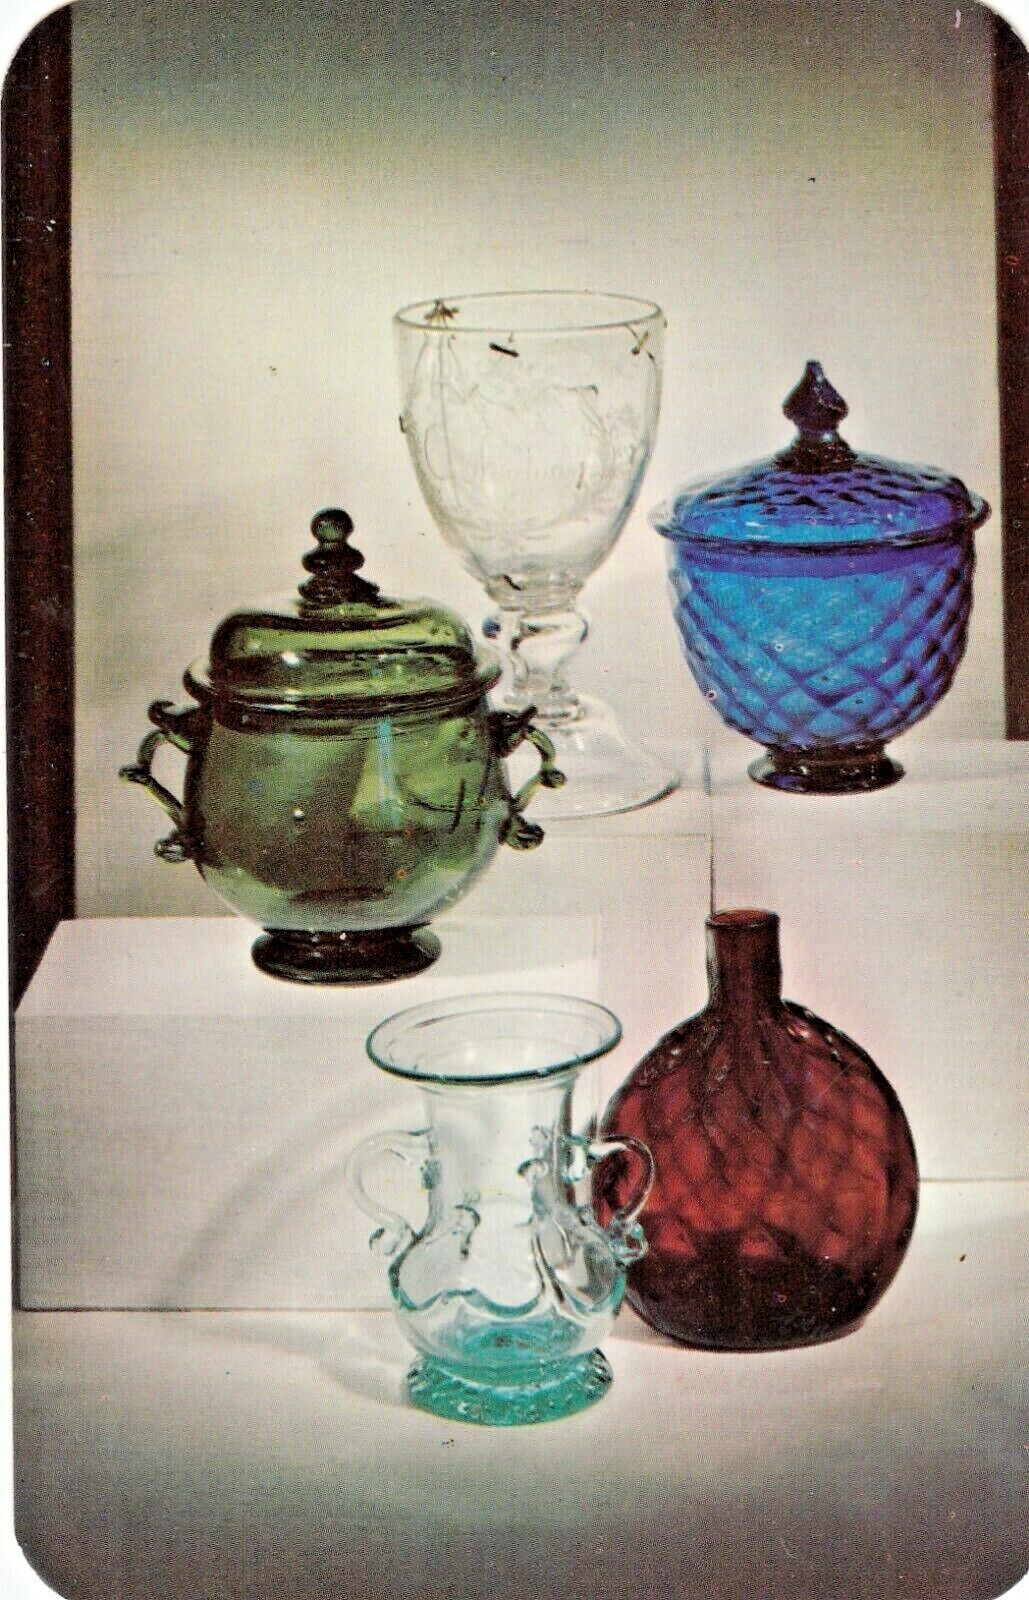 Vintage Postcard GLASSWARE  EARLY AMERICAN GLASS  CA. 1775 TO 1825  UNPOSTED